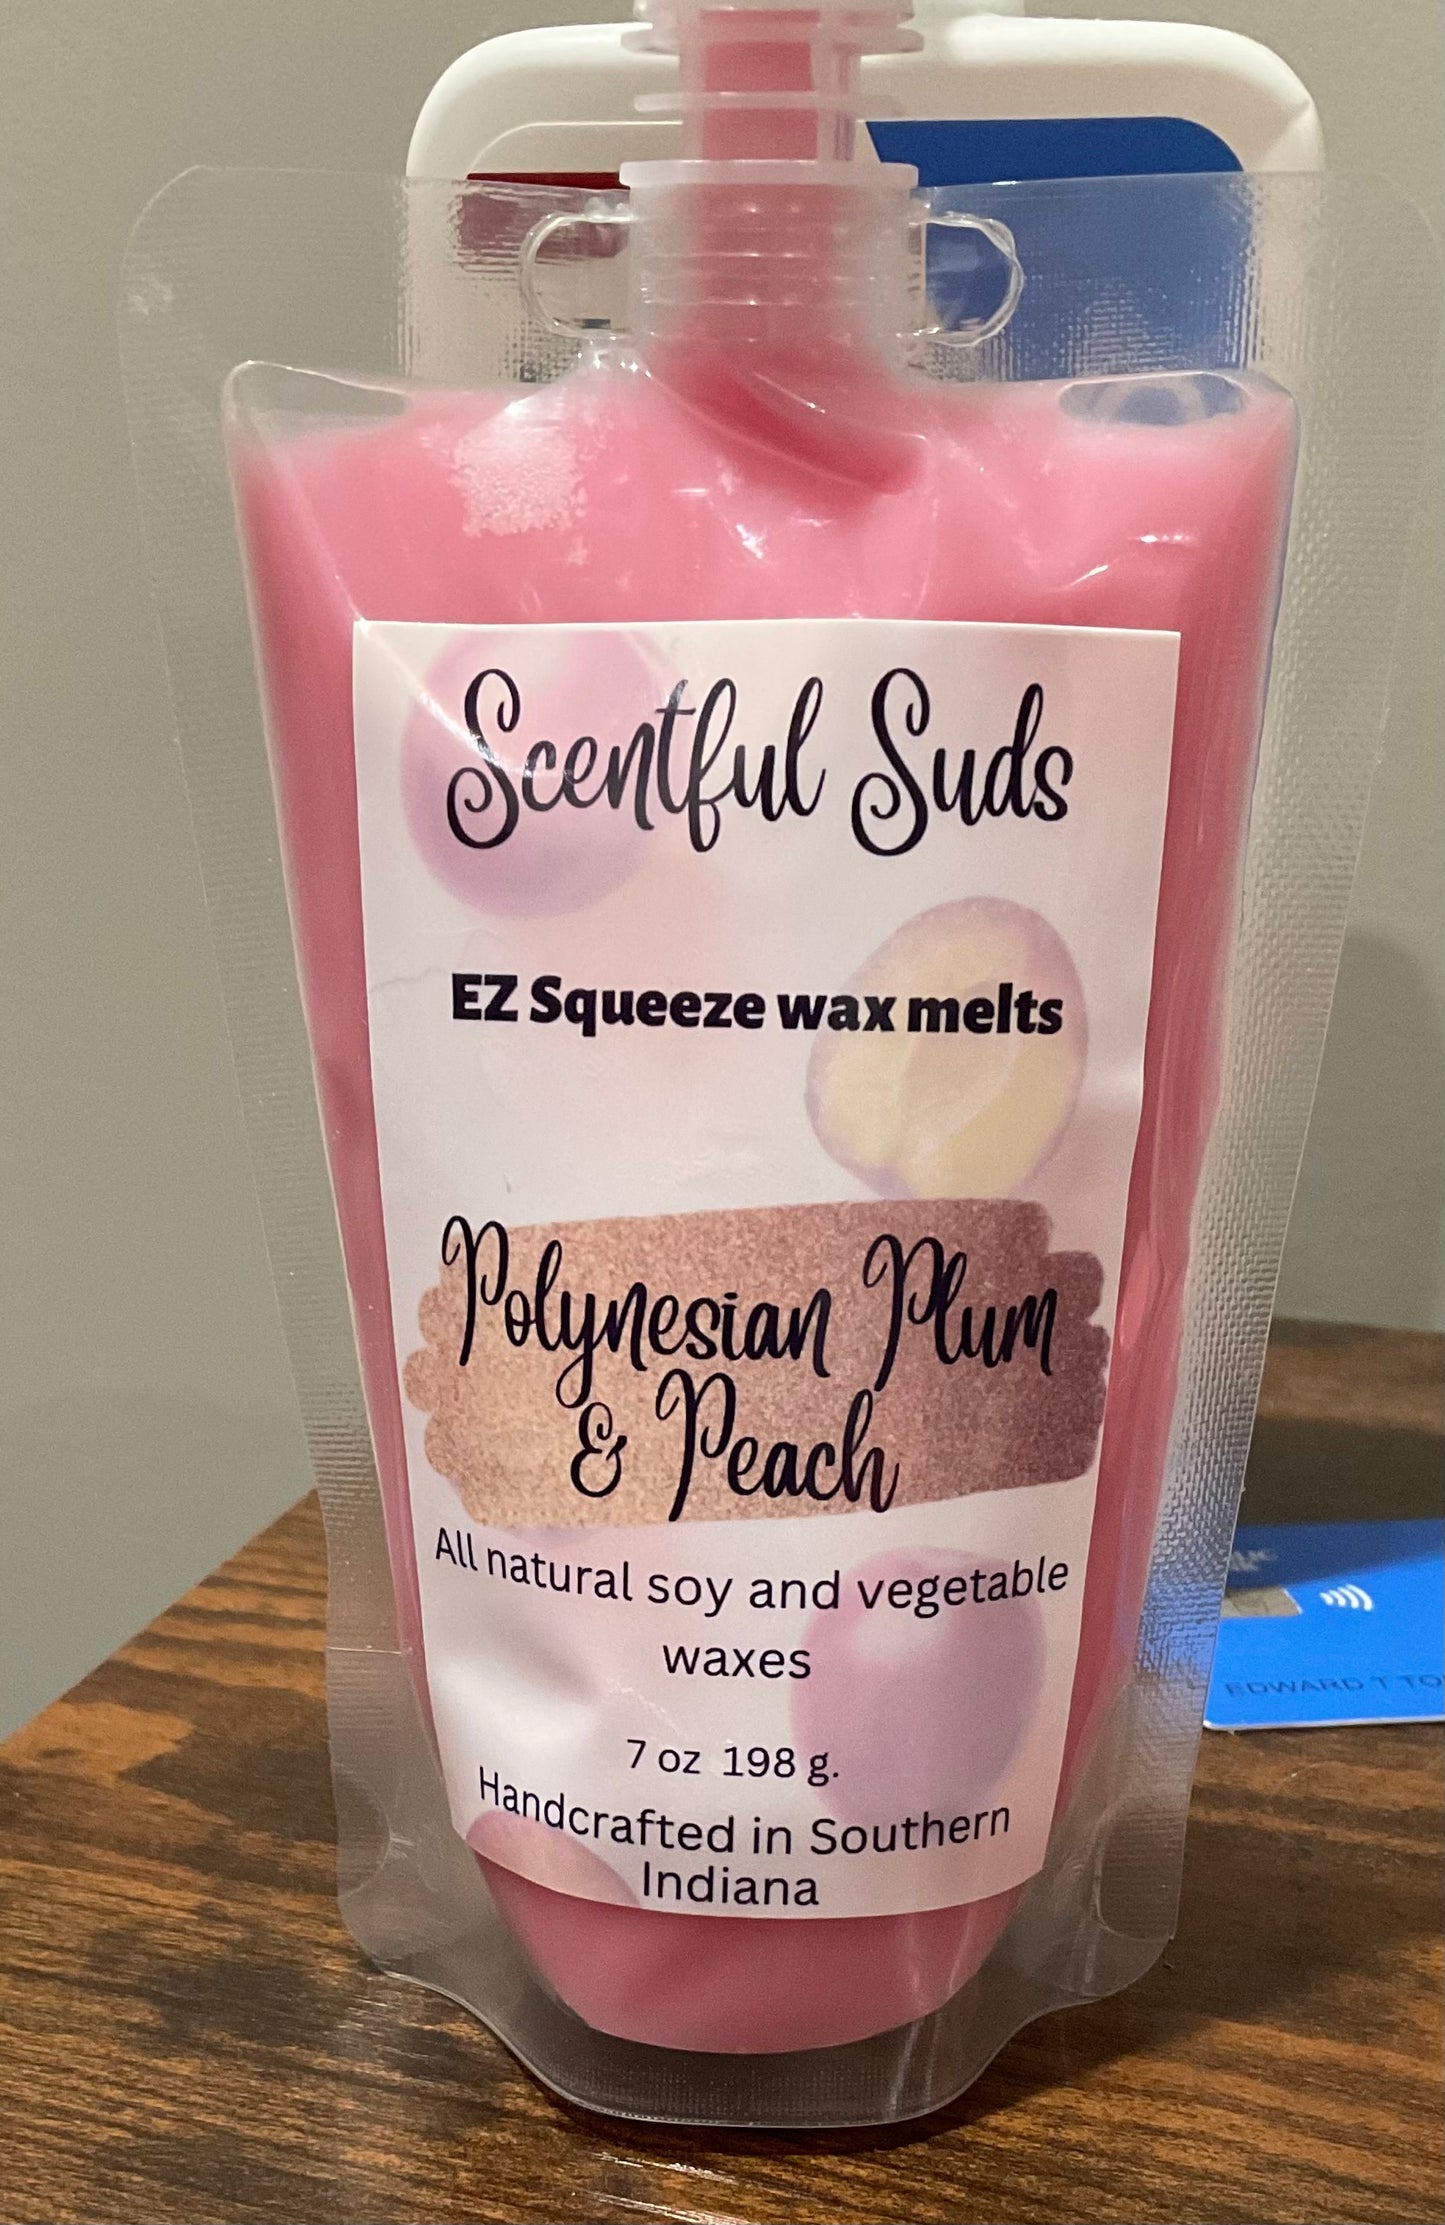 Squeezable wax melts 7 oz